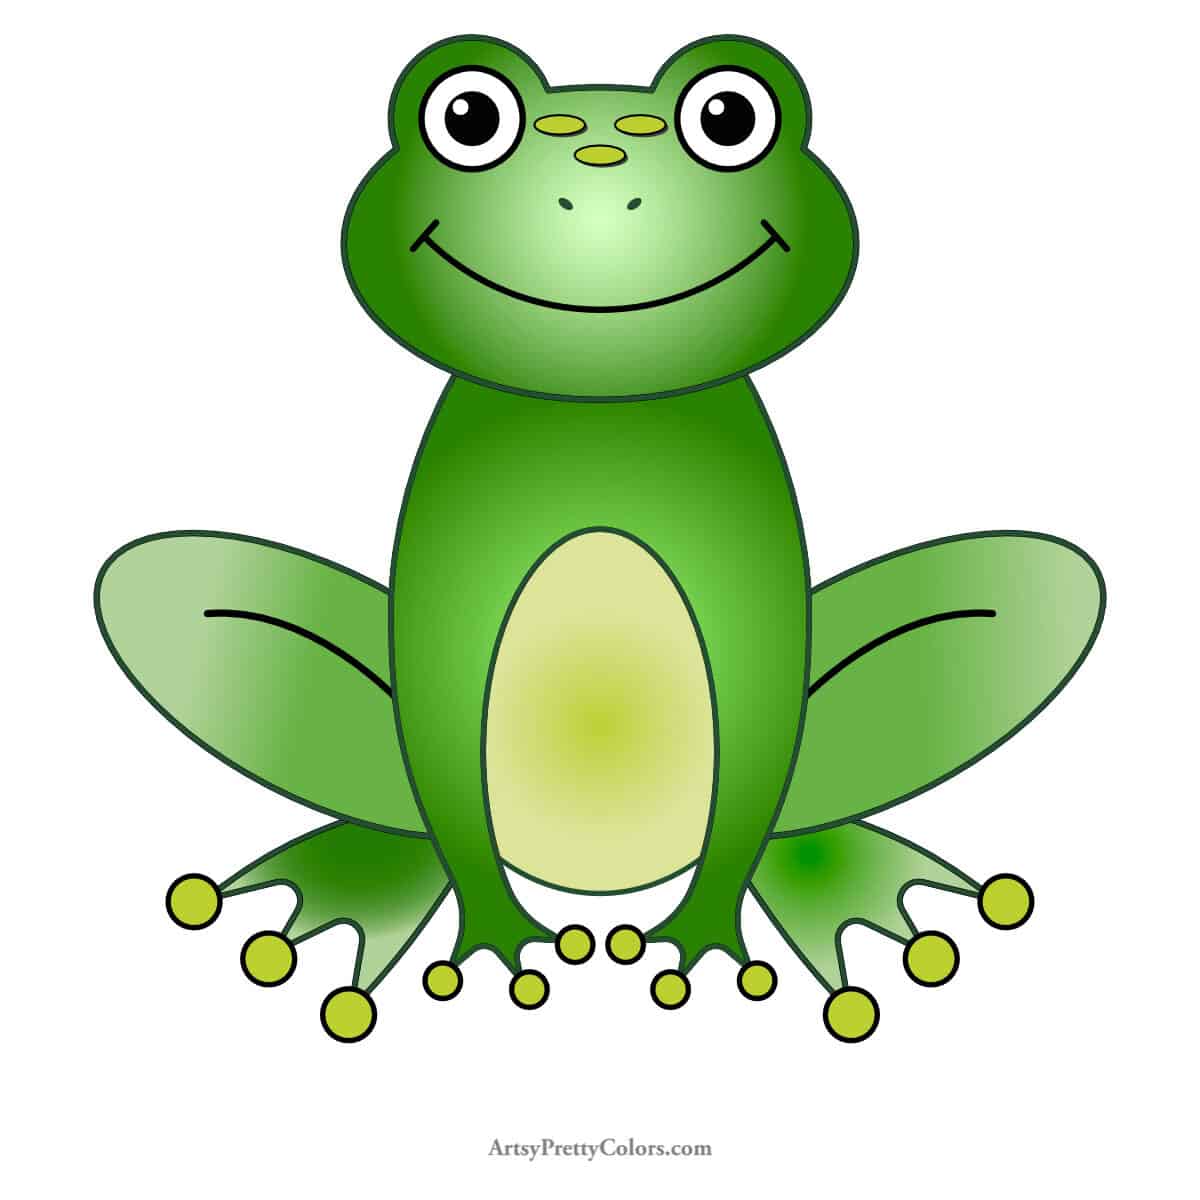 colored easy frog as a completed drawing- final step